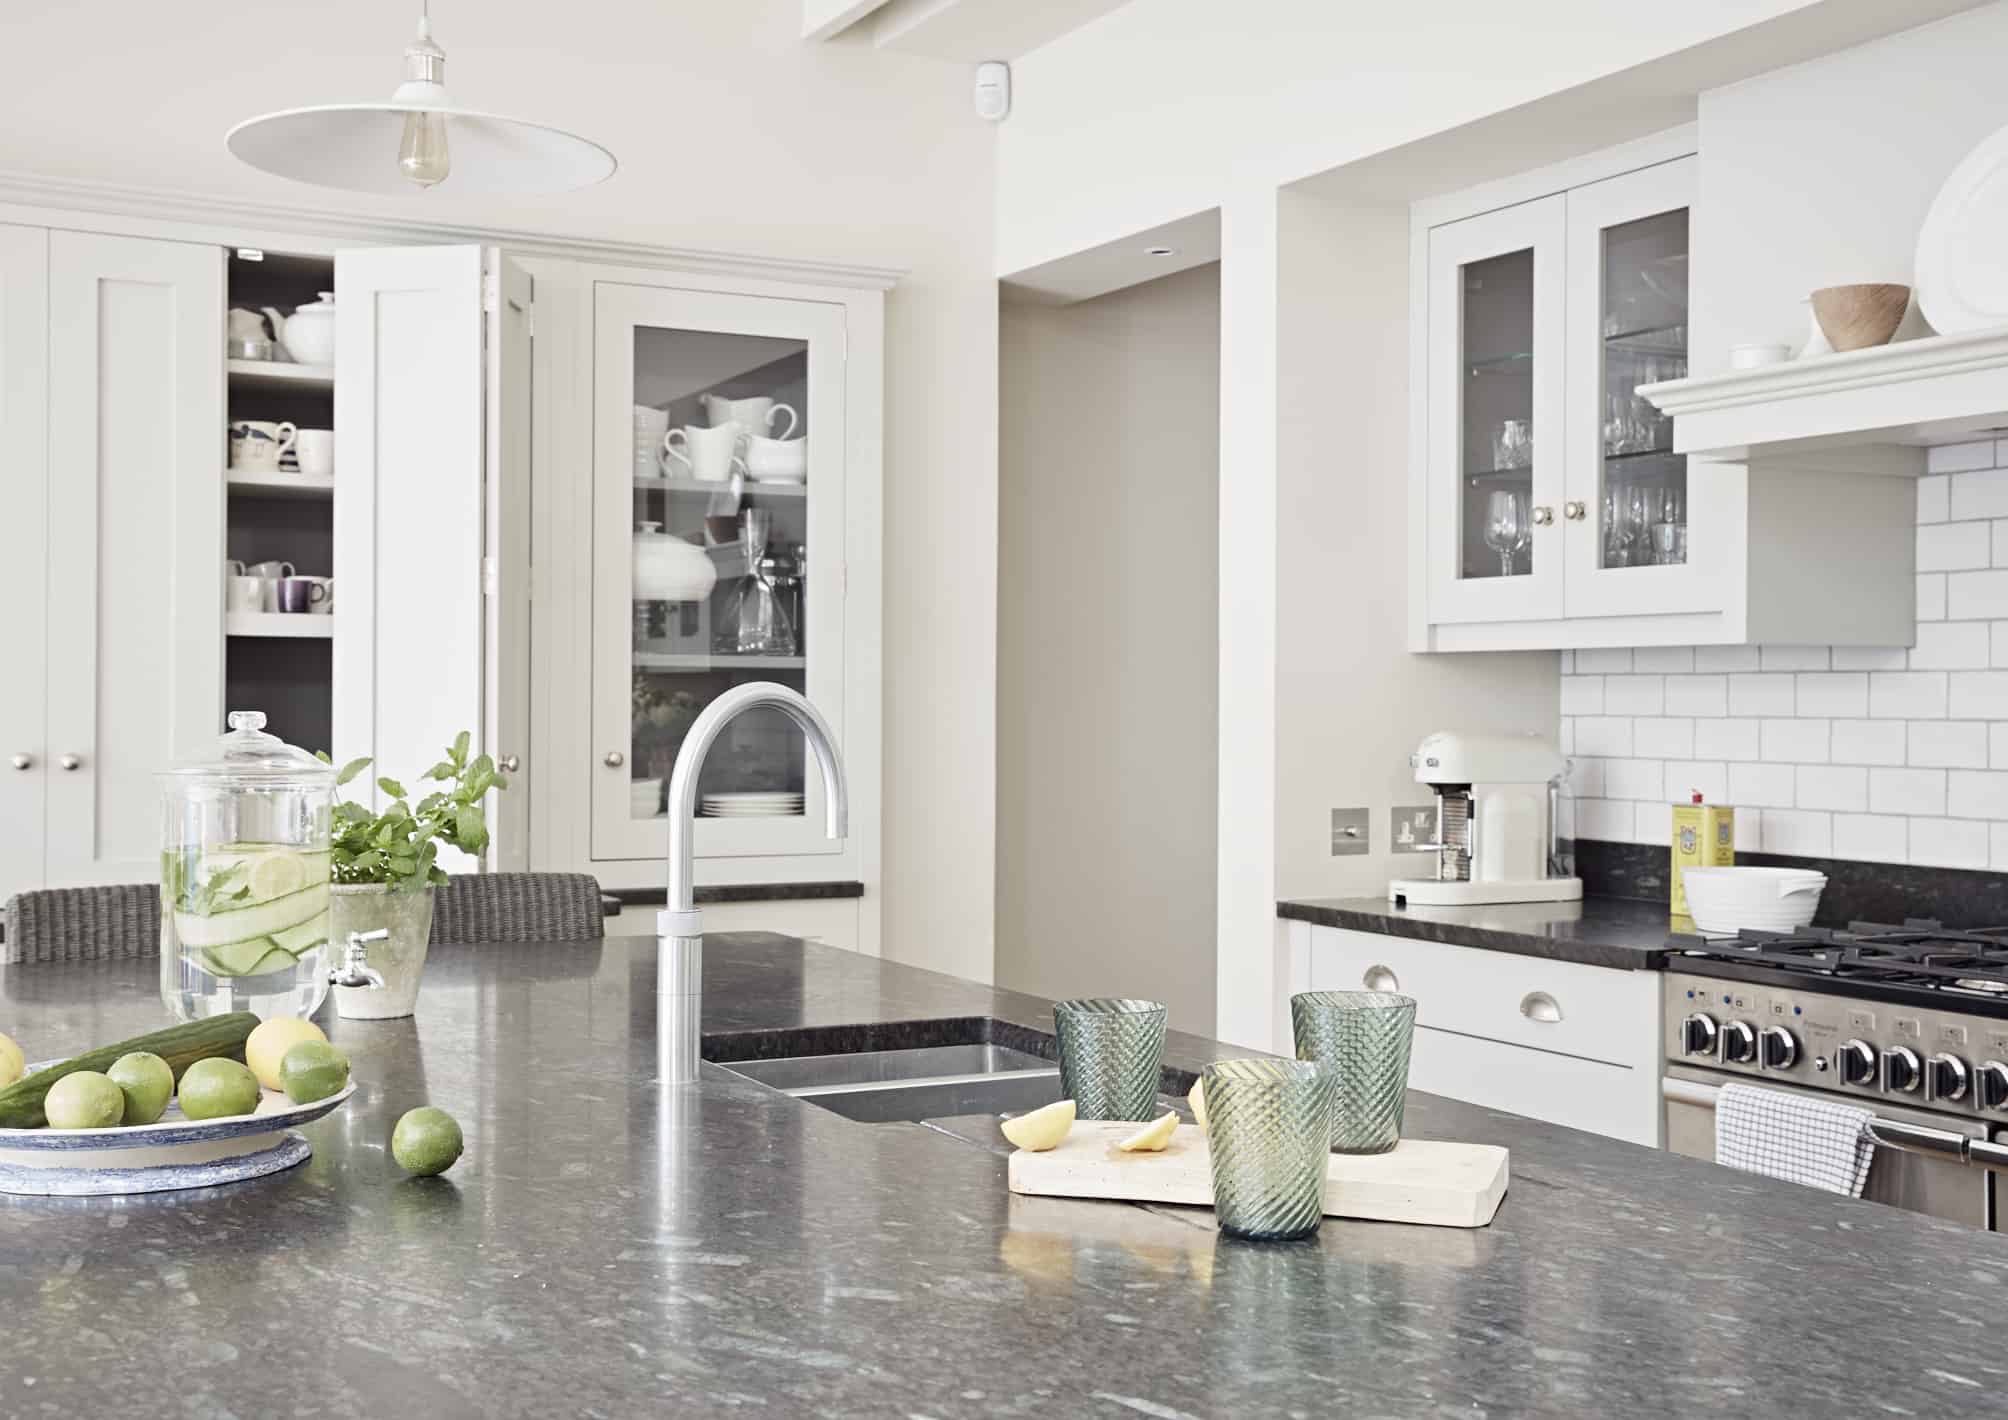 John Lewis of Hungerford luxury shaker style kitchen with dark granite worktops and white kitchen cabinetry with a kitchen island